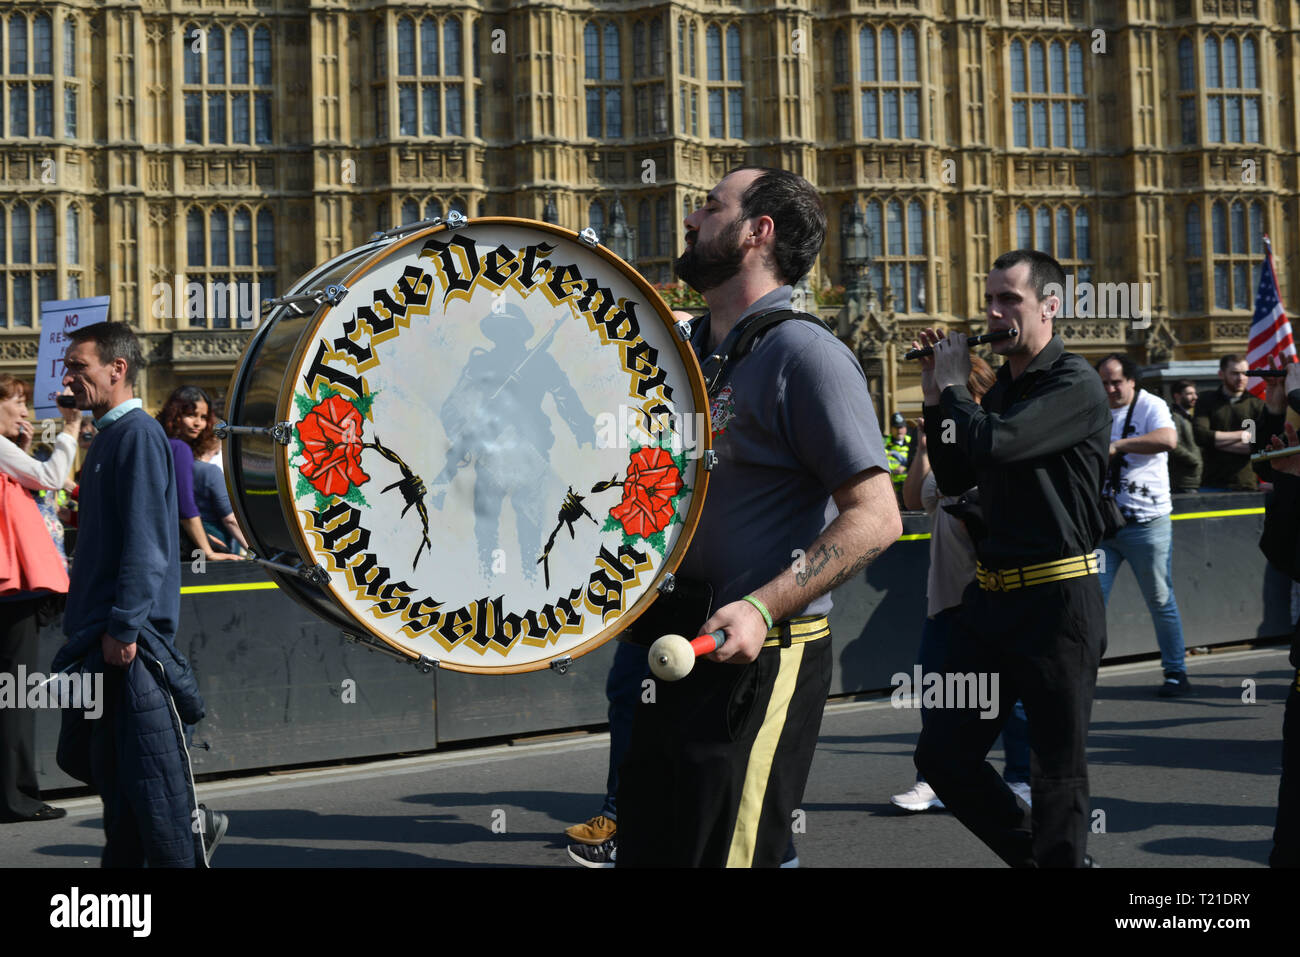 London, UK. 29th March, 2019. Pro-Brexit protest opposite Houses Of Parliament, on the day the UK was supposed to be leaving the EU. Credit: Thomas Krych/Alamy Live News. Stock Photo